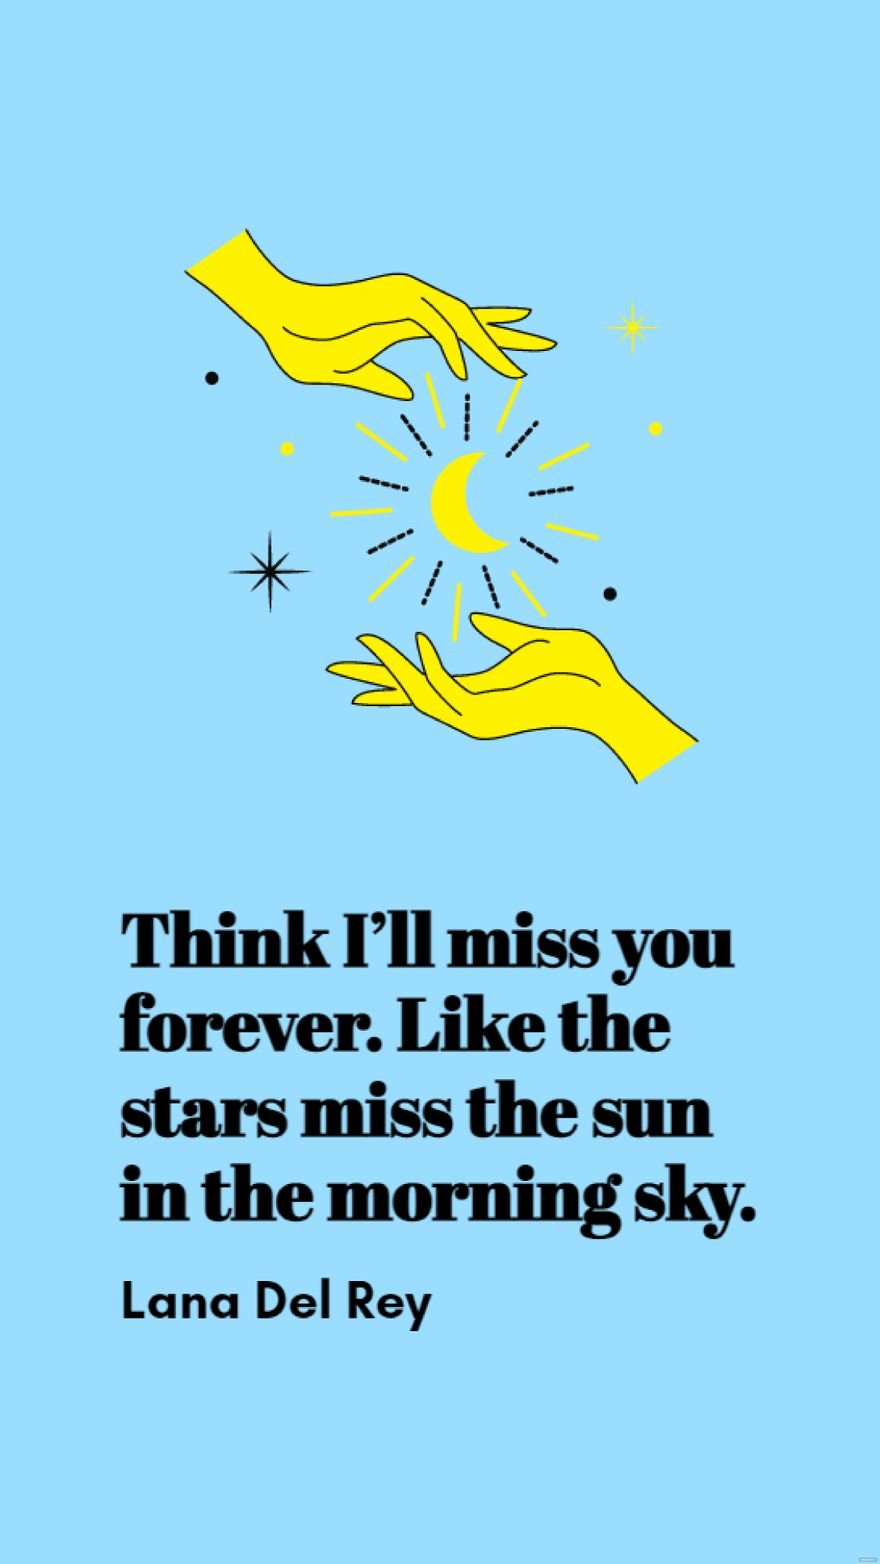 Lana Del Rey - Think I’ll miss you forever. Like the stars miss the sun in the morning sky.